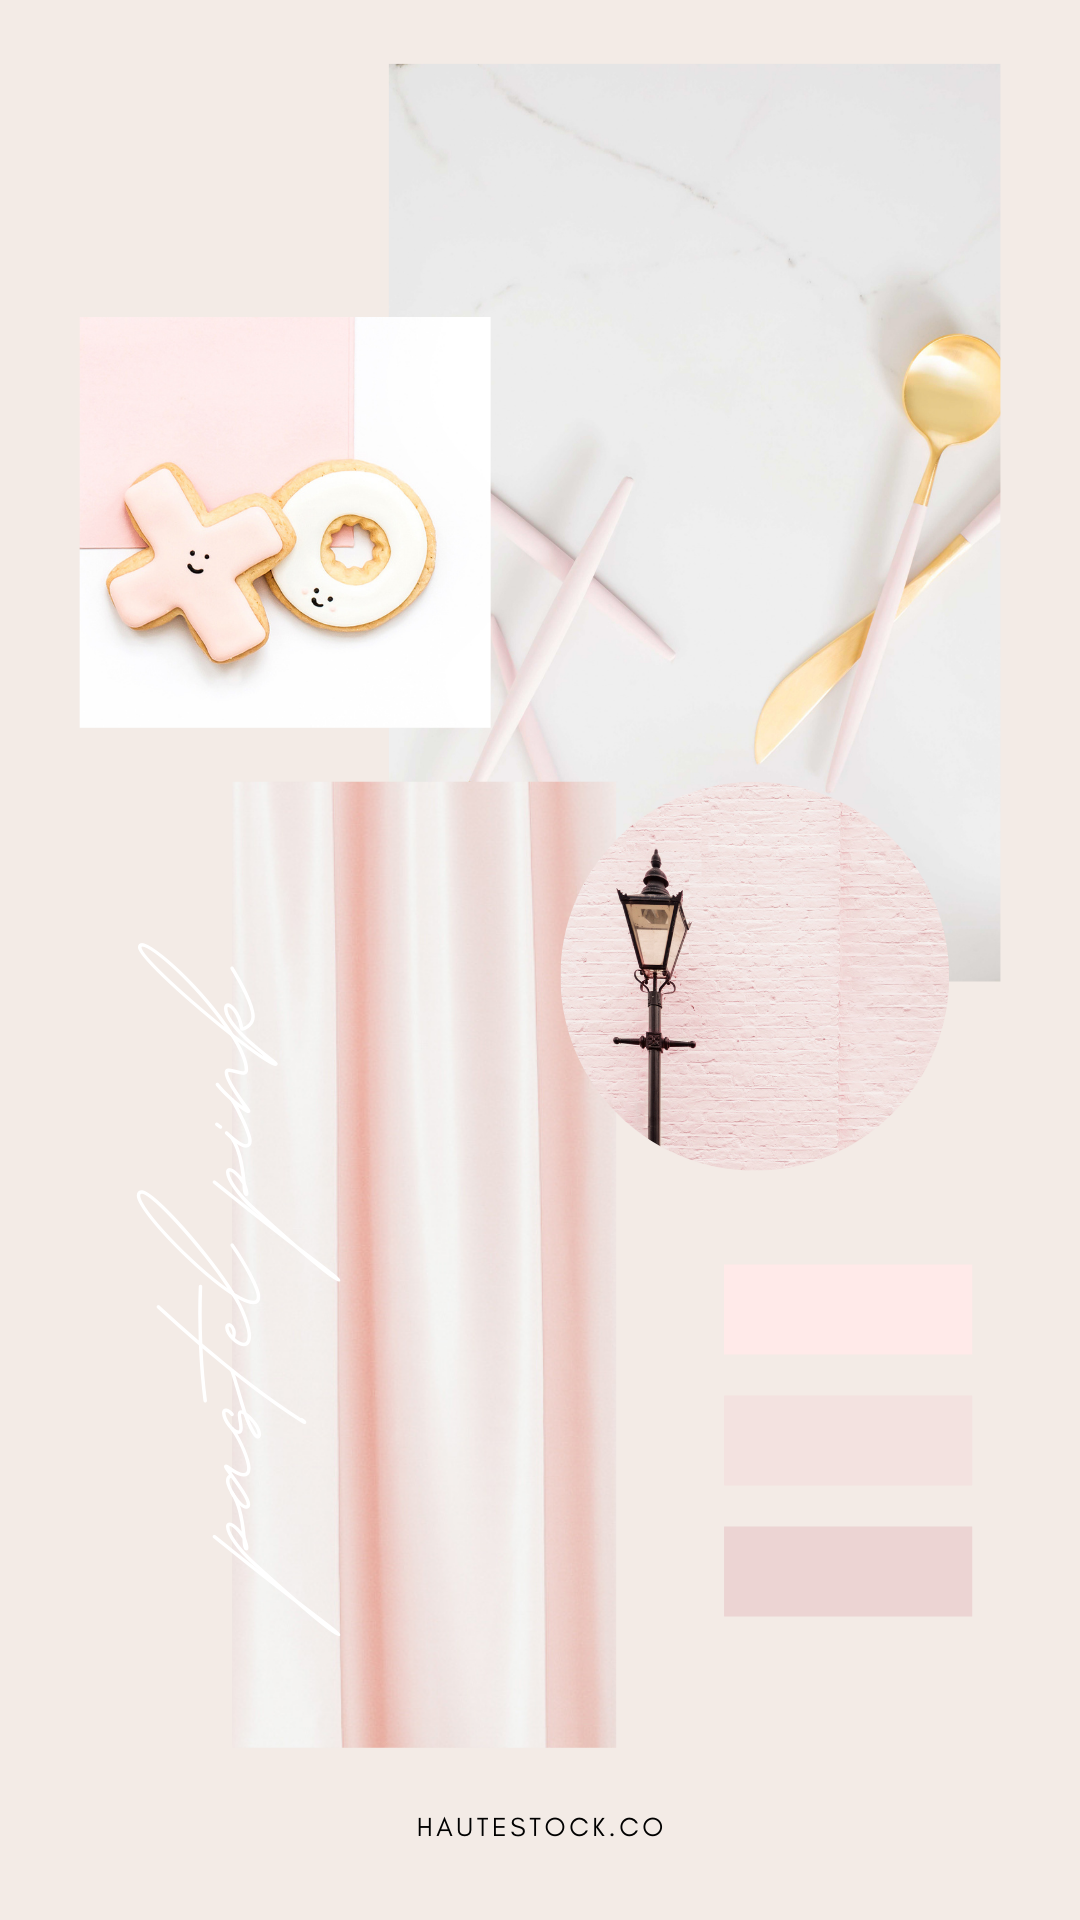 Blush pink Valentine's Day stock photos for brands to use on Instagram, or on Valentine's Day sales graphics. Available exclusively from Haute Stock.